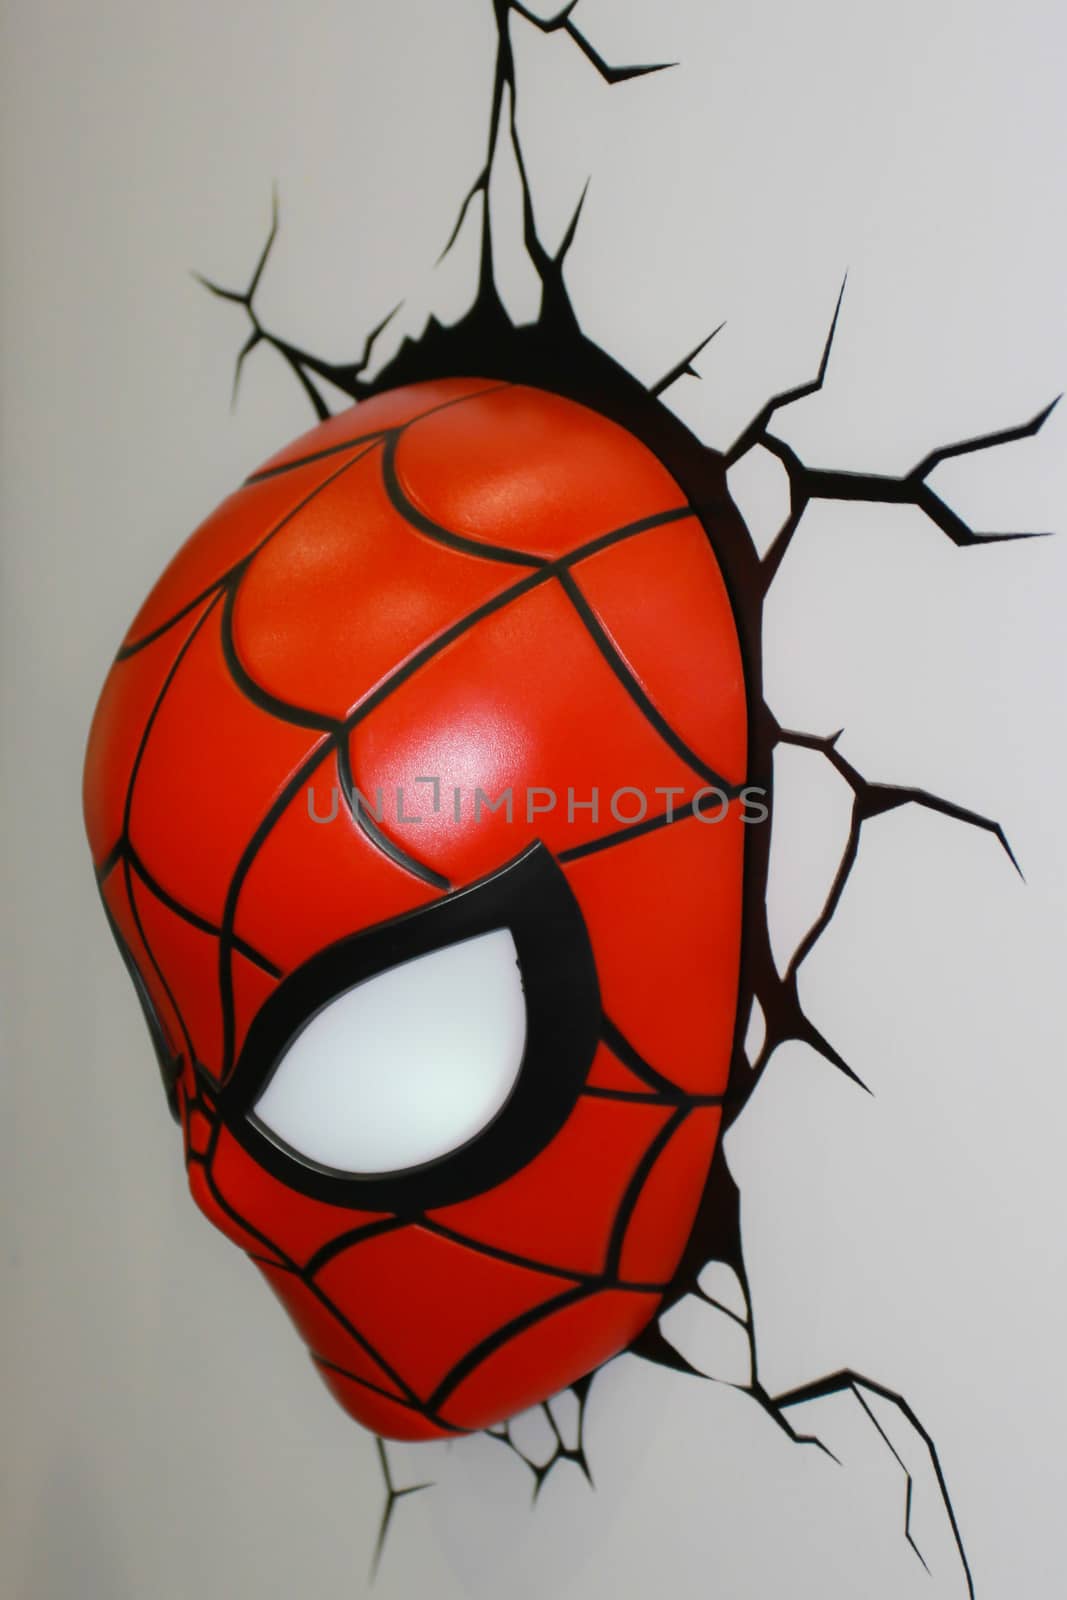 A model of the Spiderman Mask from the movies and comics  by redthirteen